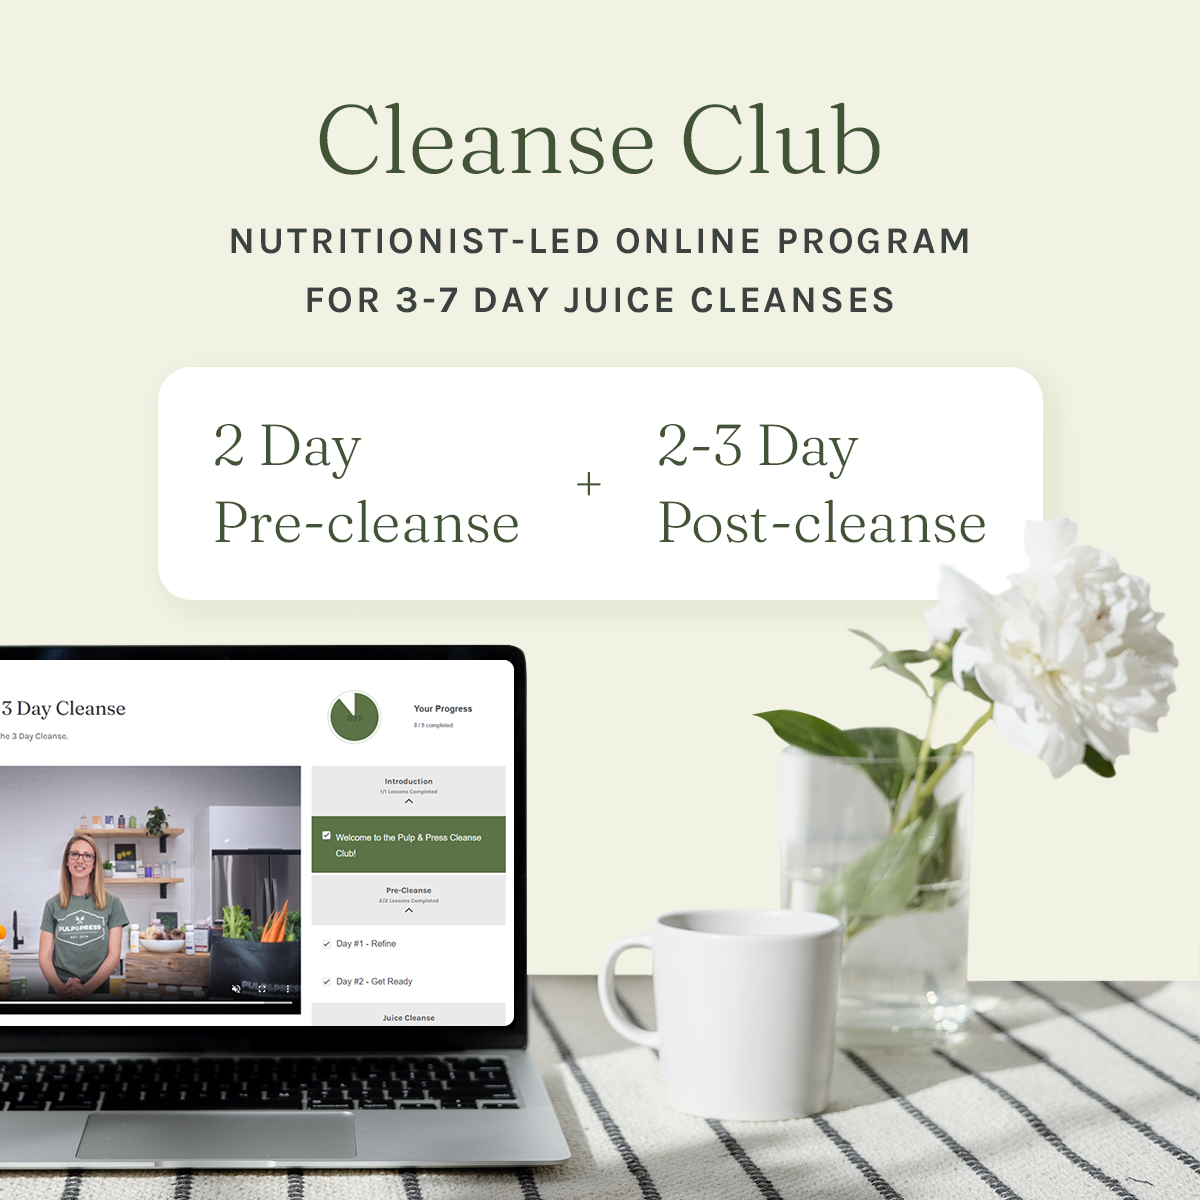 cleanse club 2 day pre cleanse and 2-3 day post cleanse to optimize juice cleanse journey